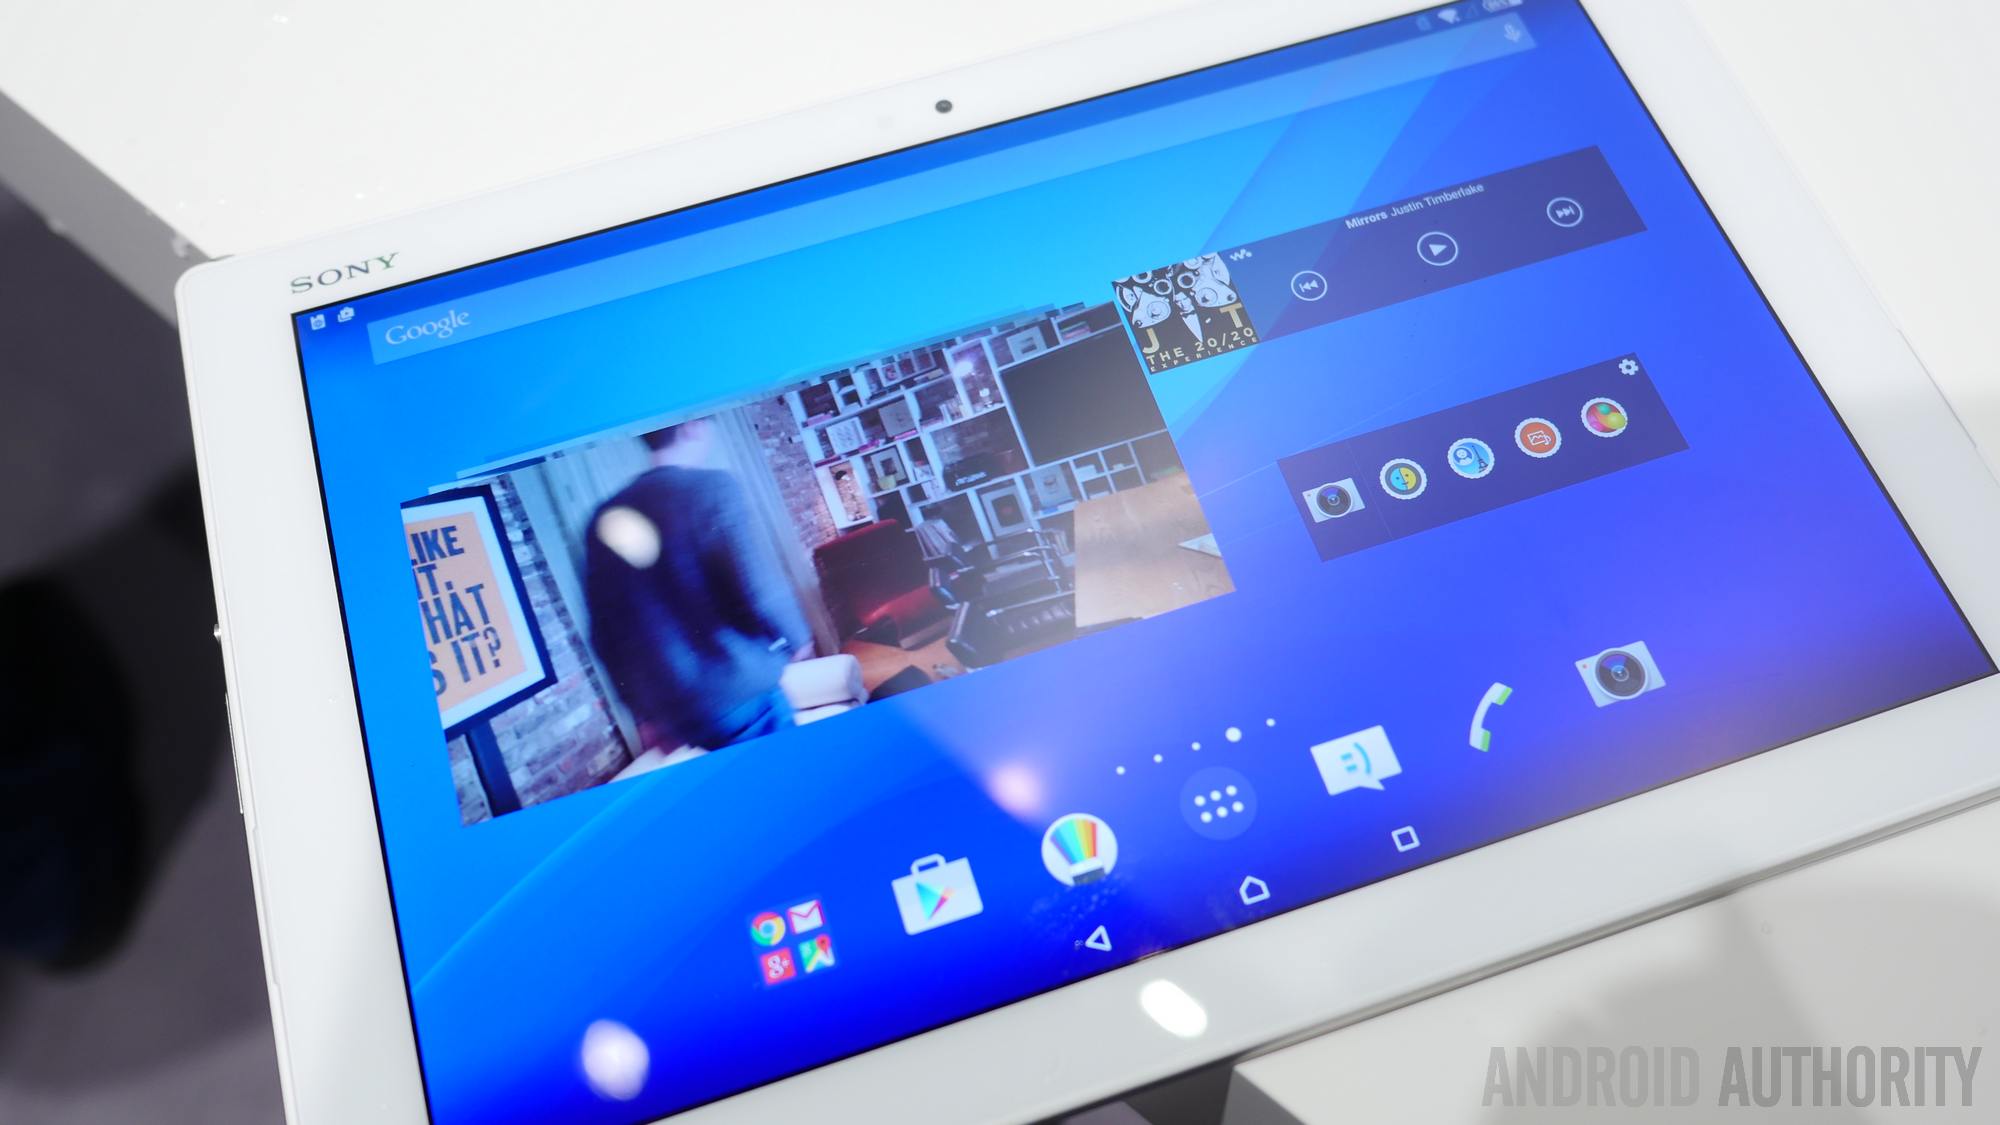 Sony Xperia Z4 Tablet first look!